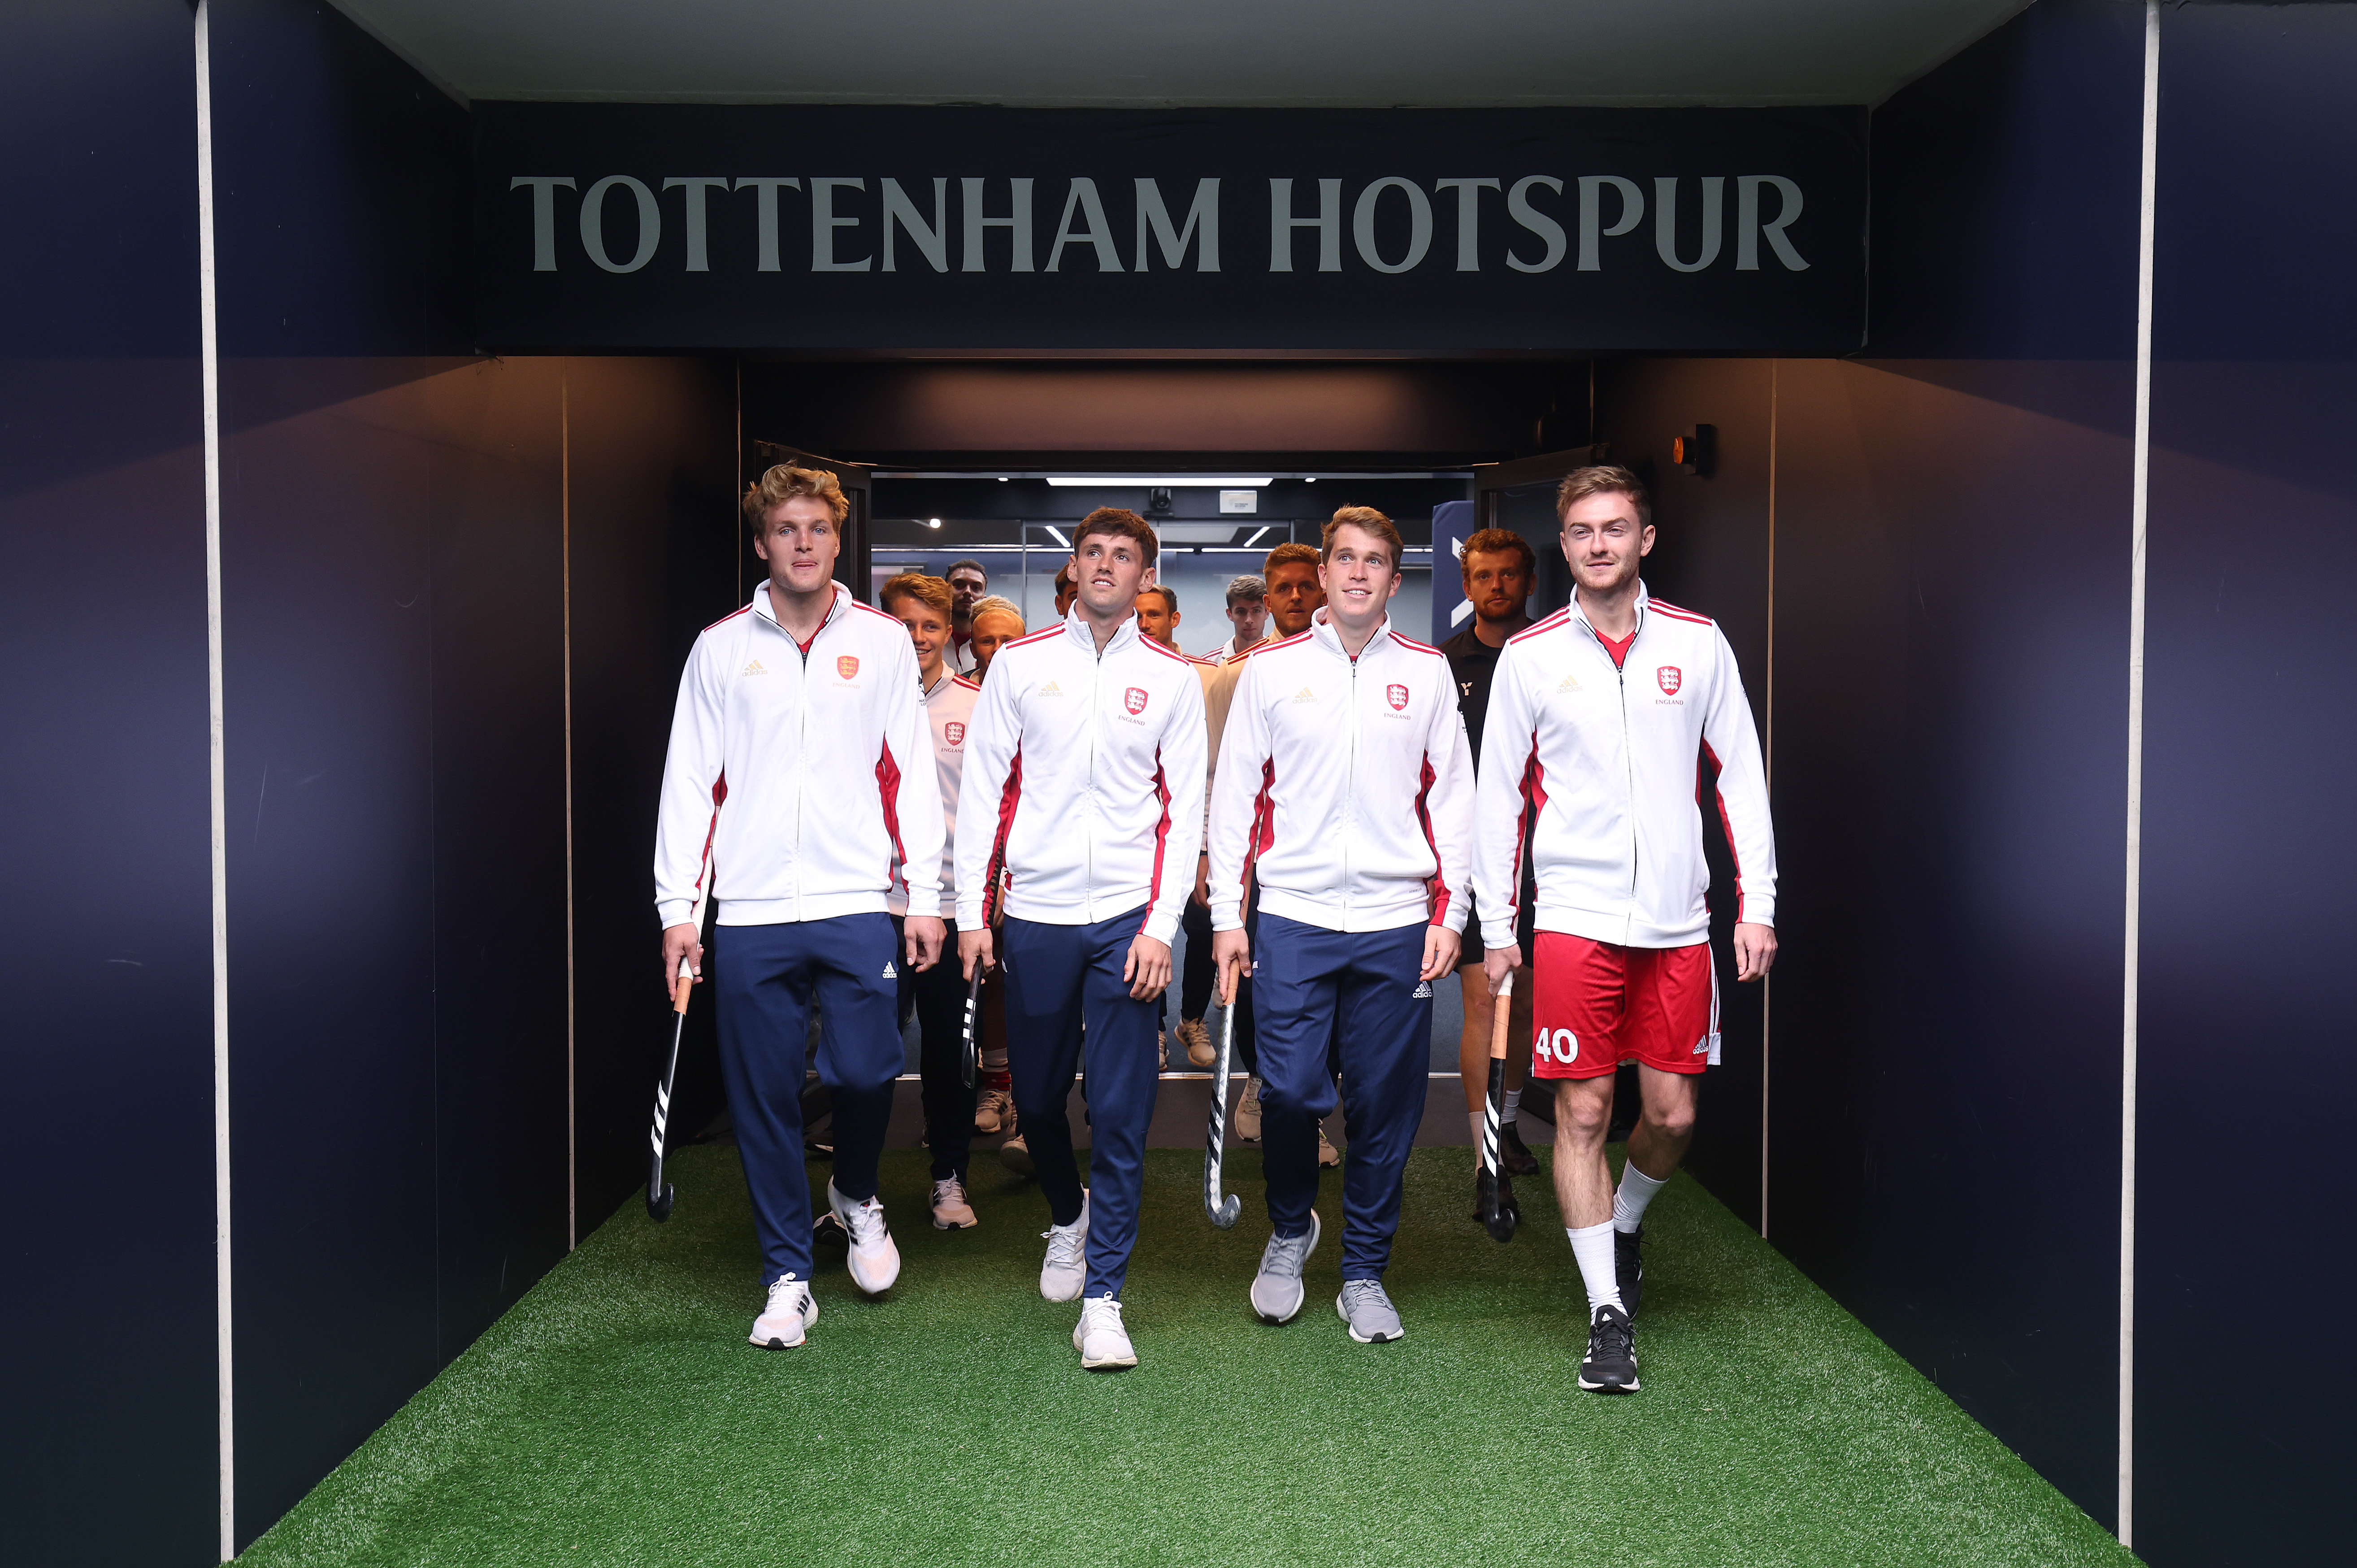 England Wales hockey players at Spurs 